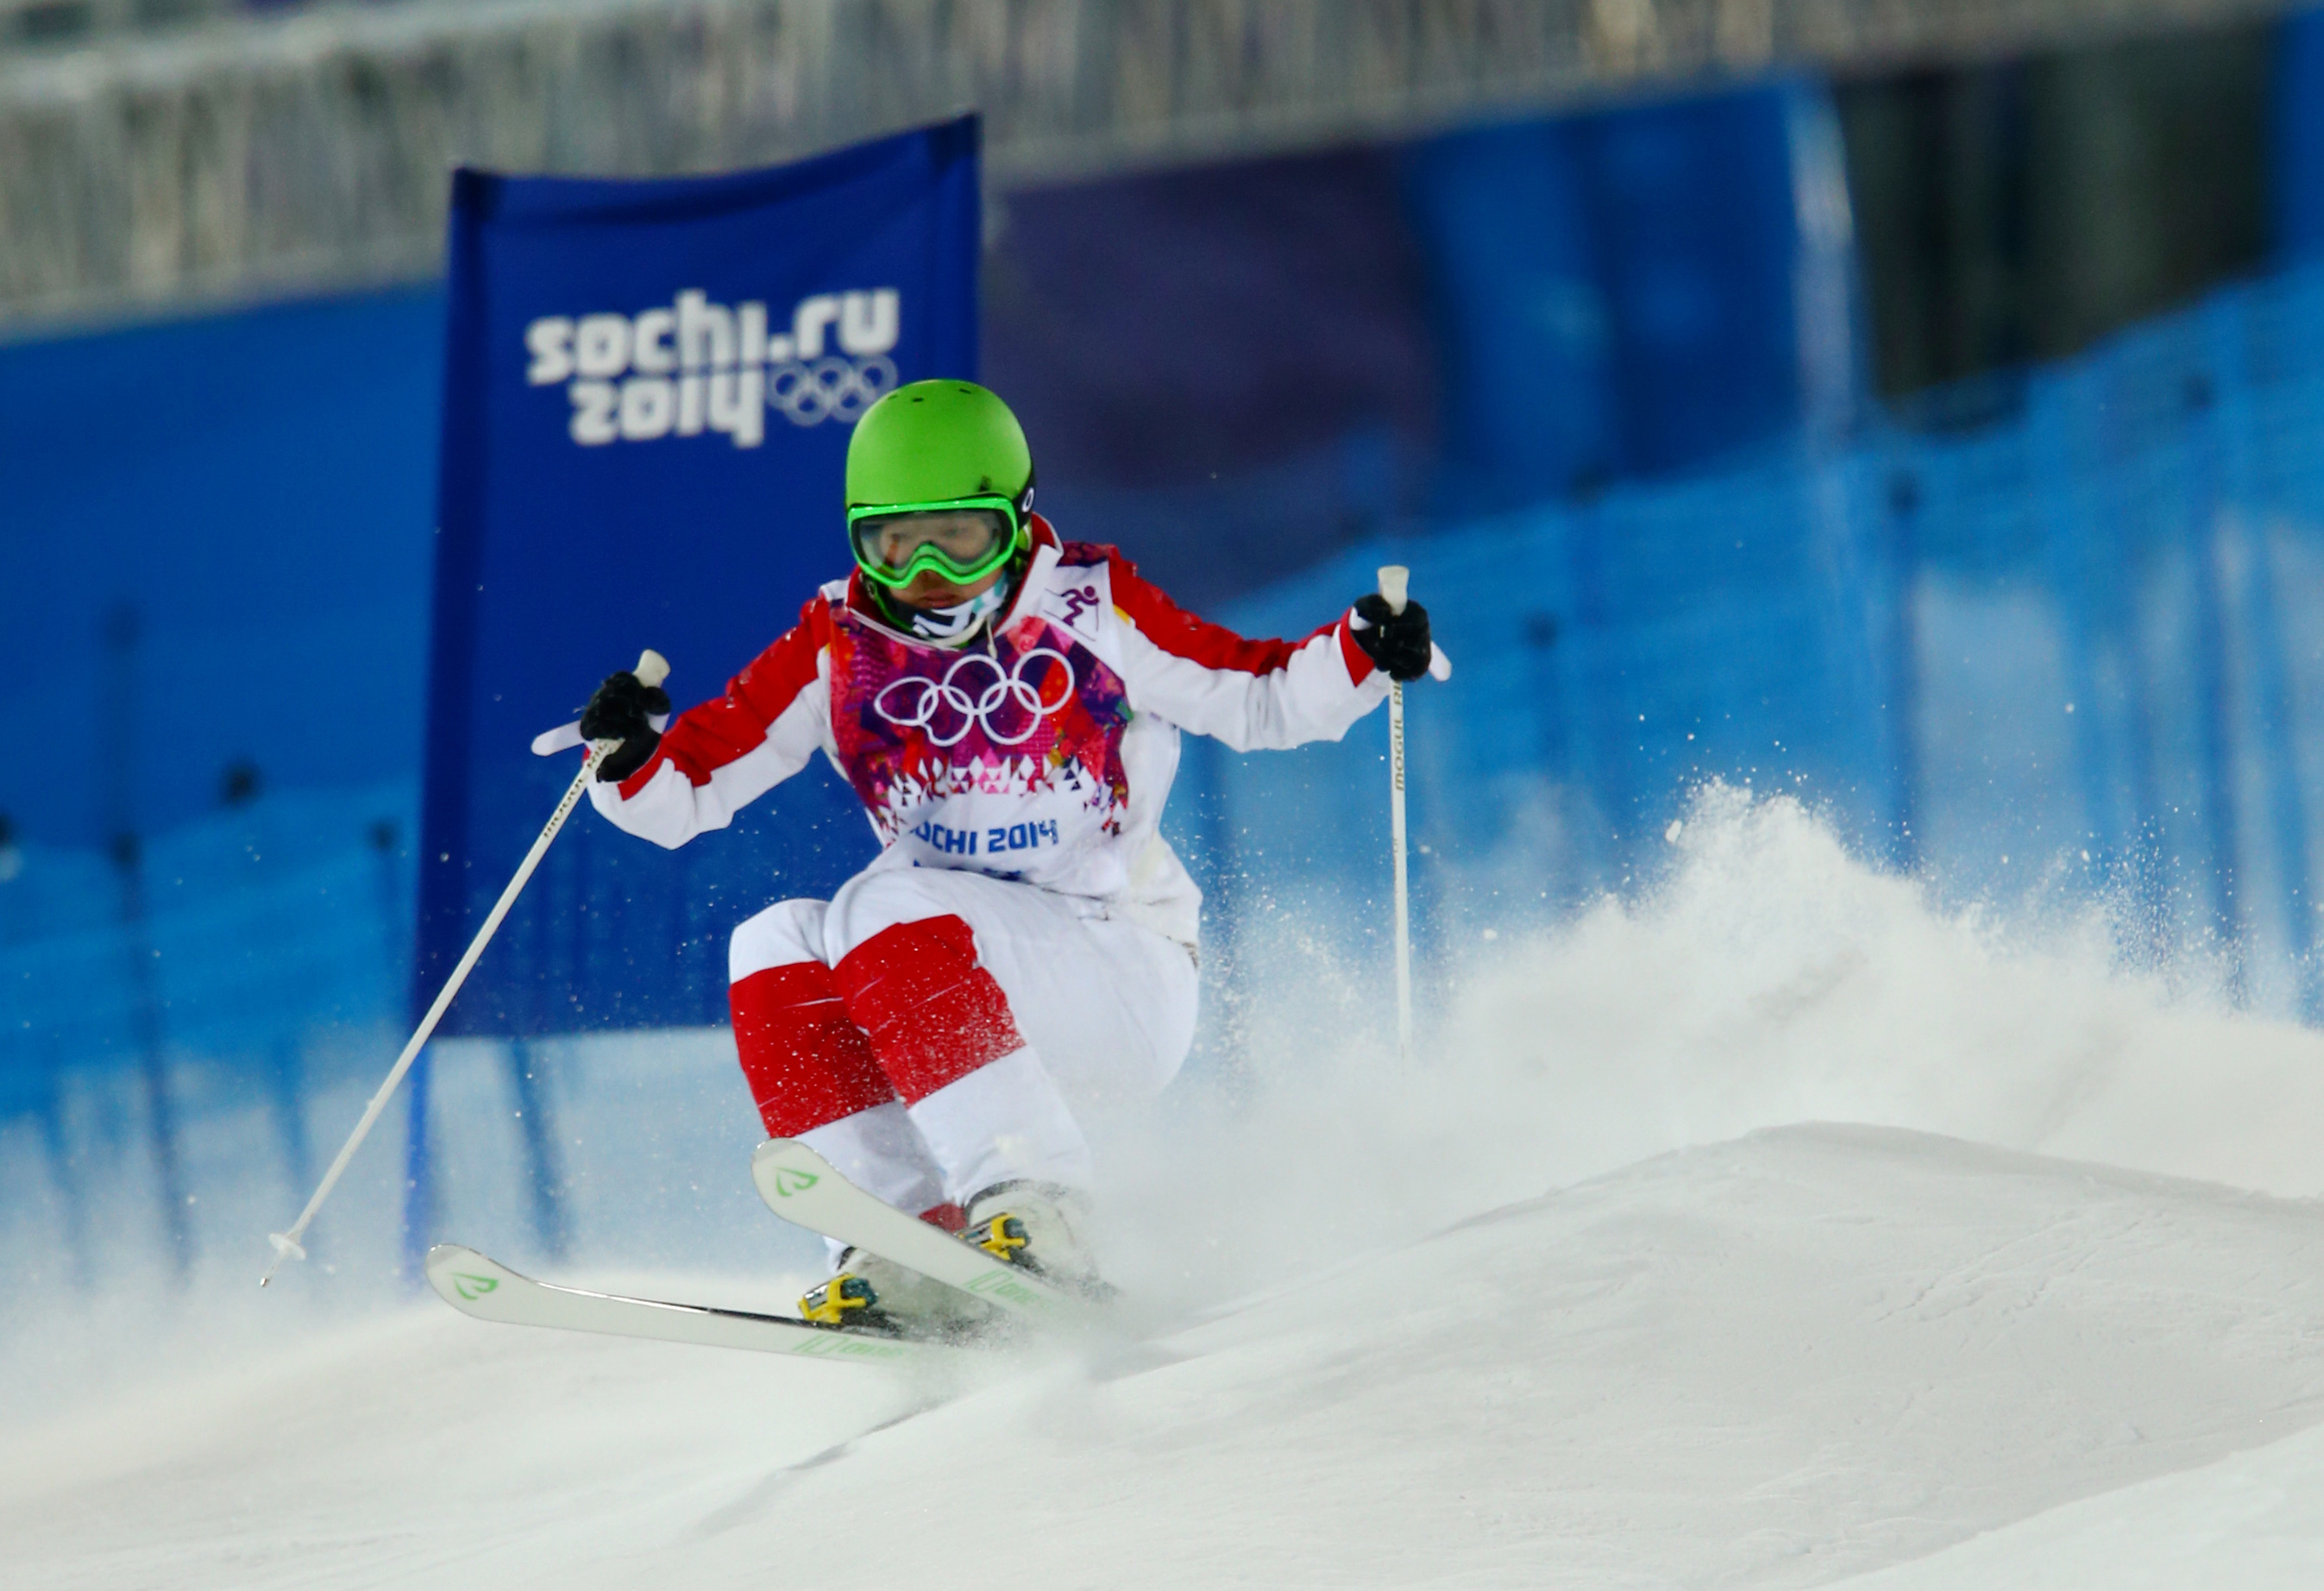 Skier Skiing On The Track At Olympic Games In Sochi